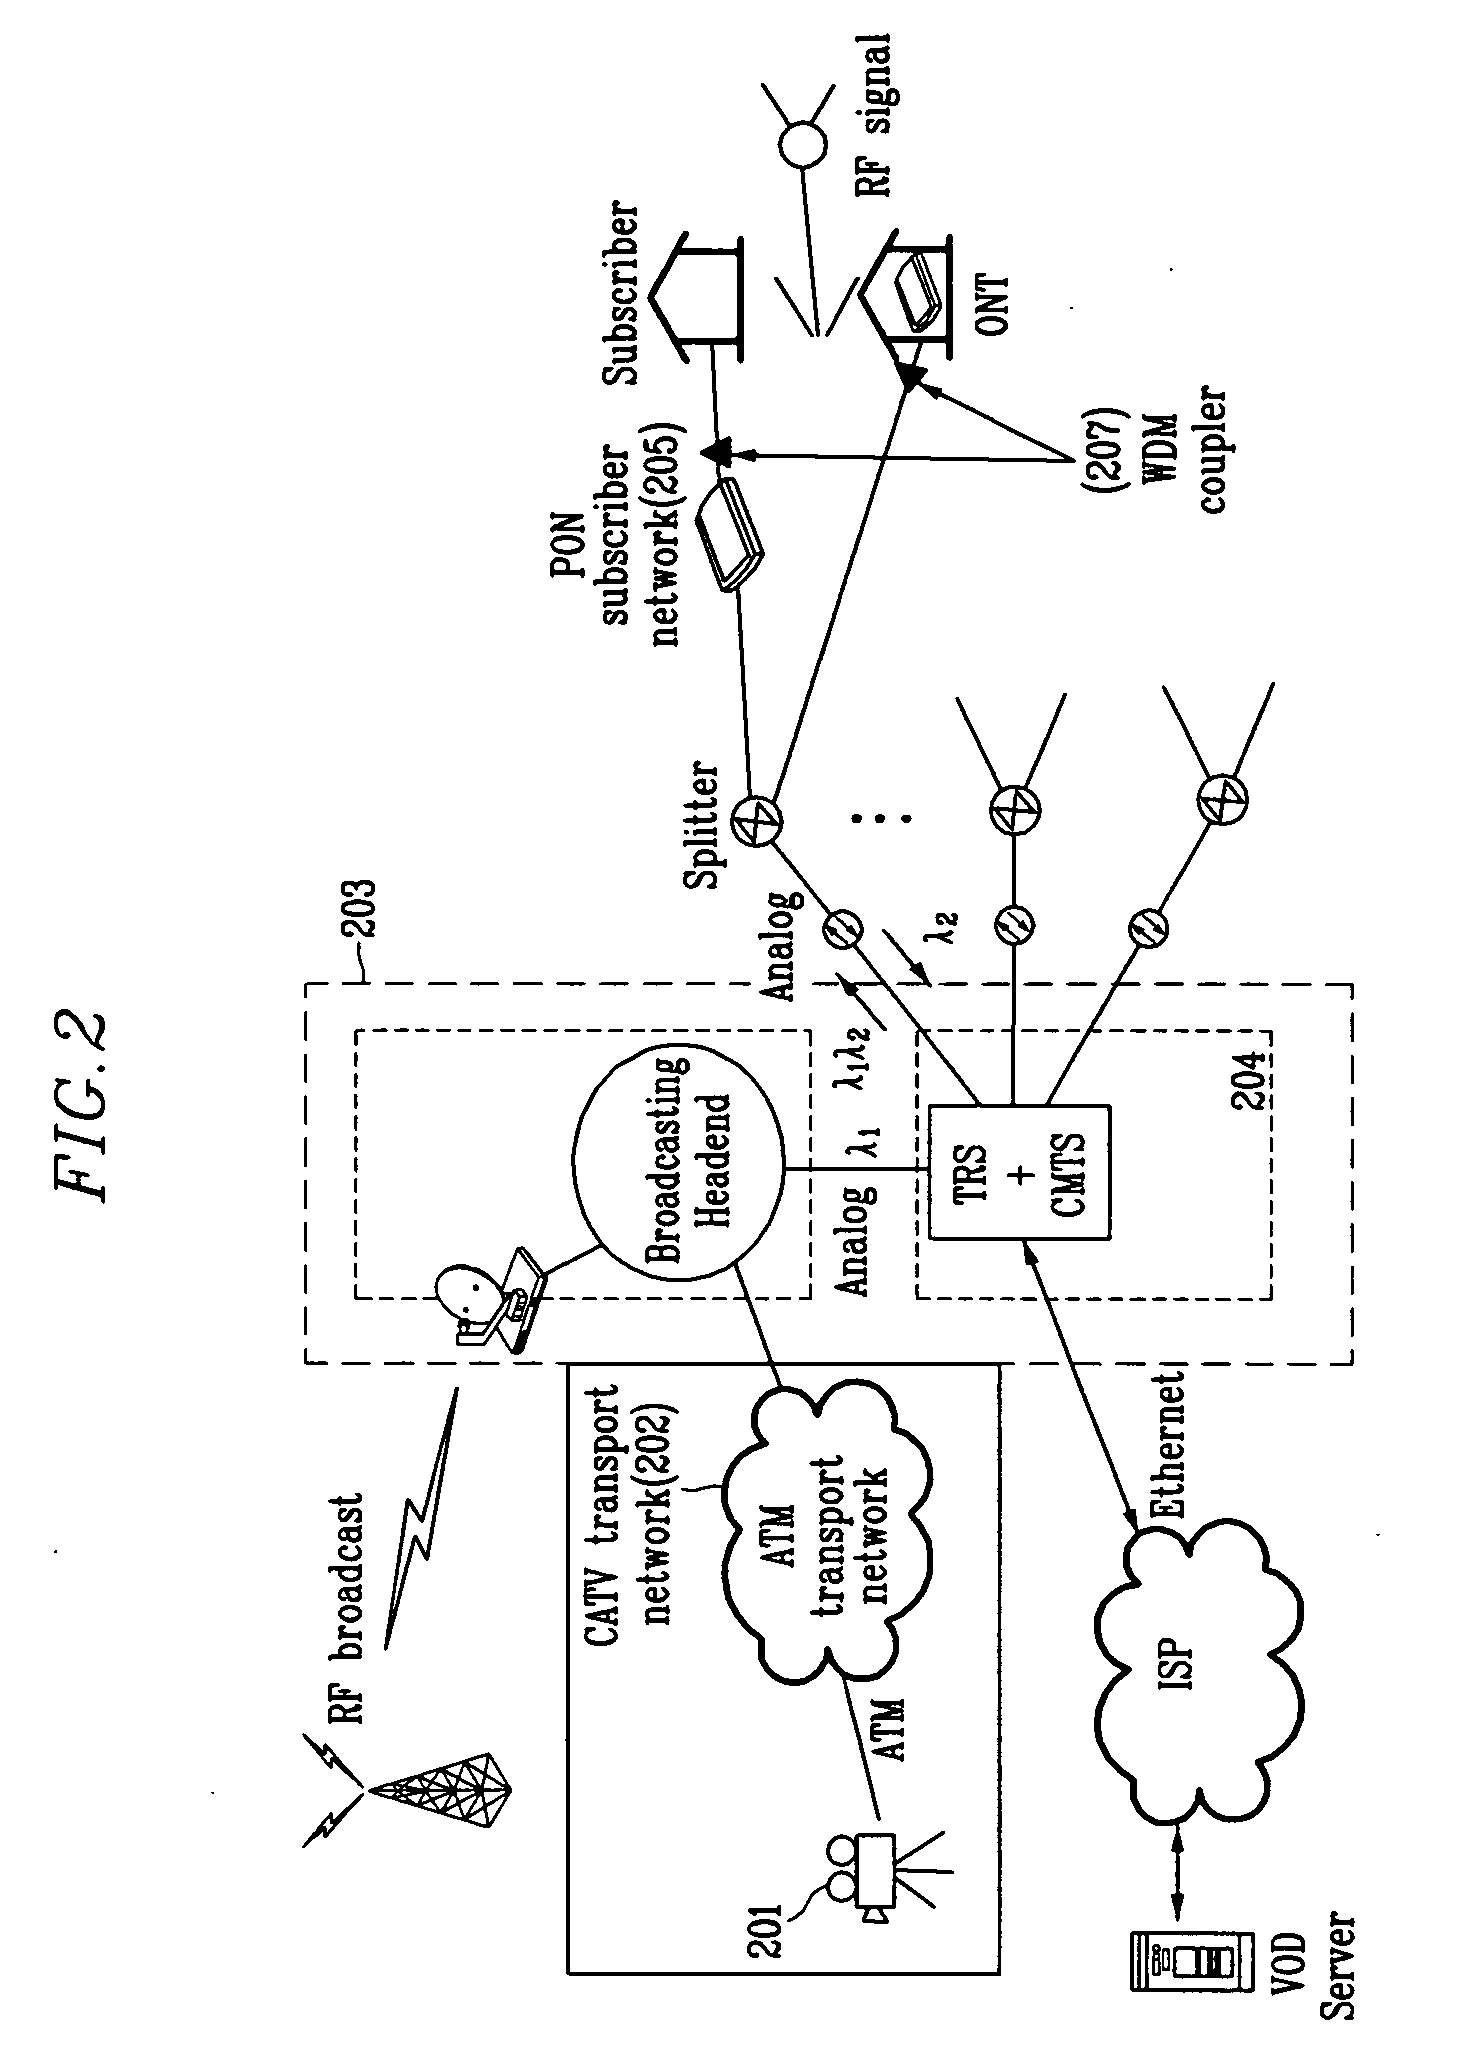 Broadcasting and communication combining system based on Ethernet and method thereof